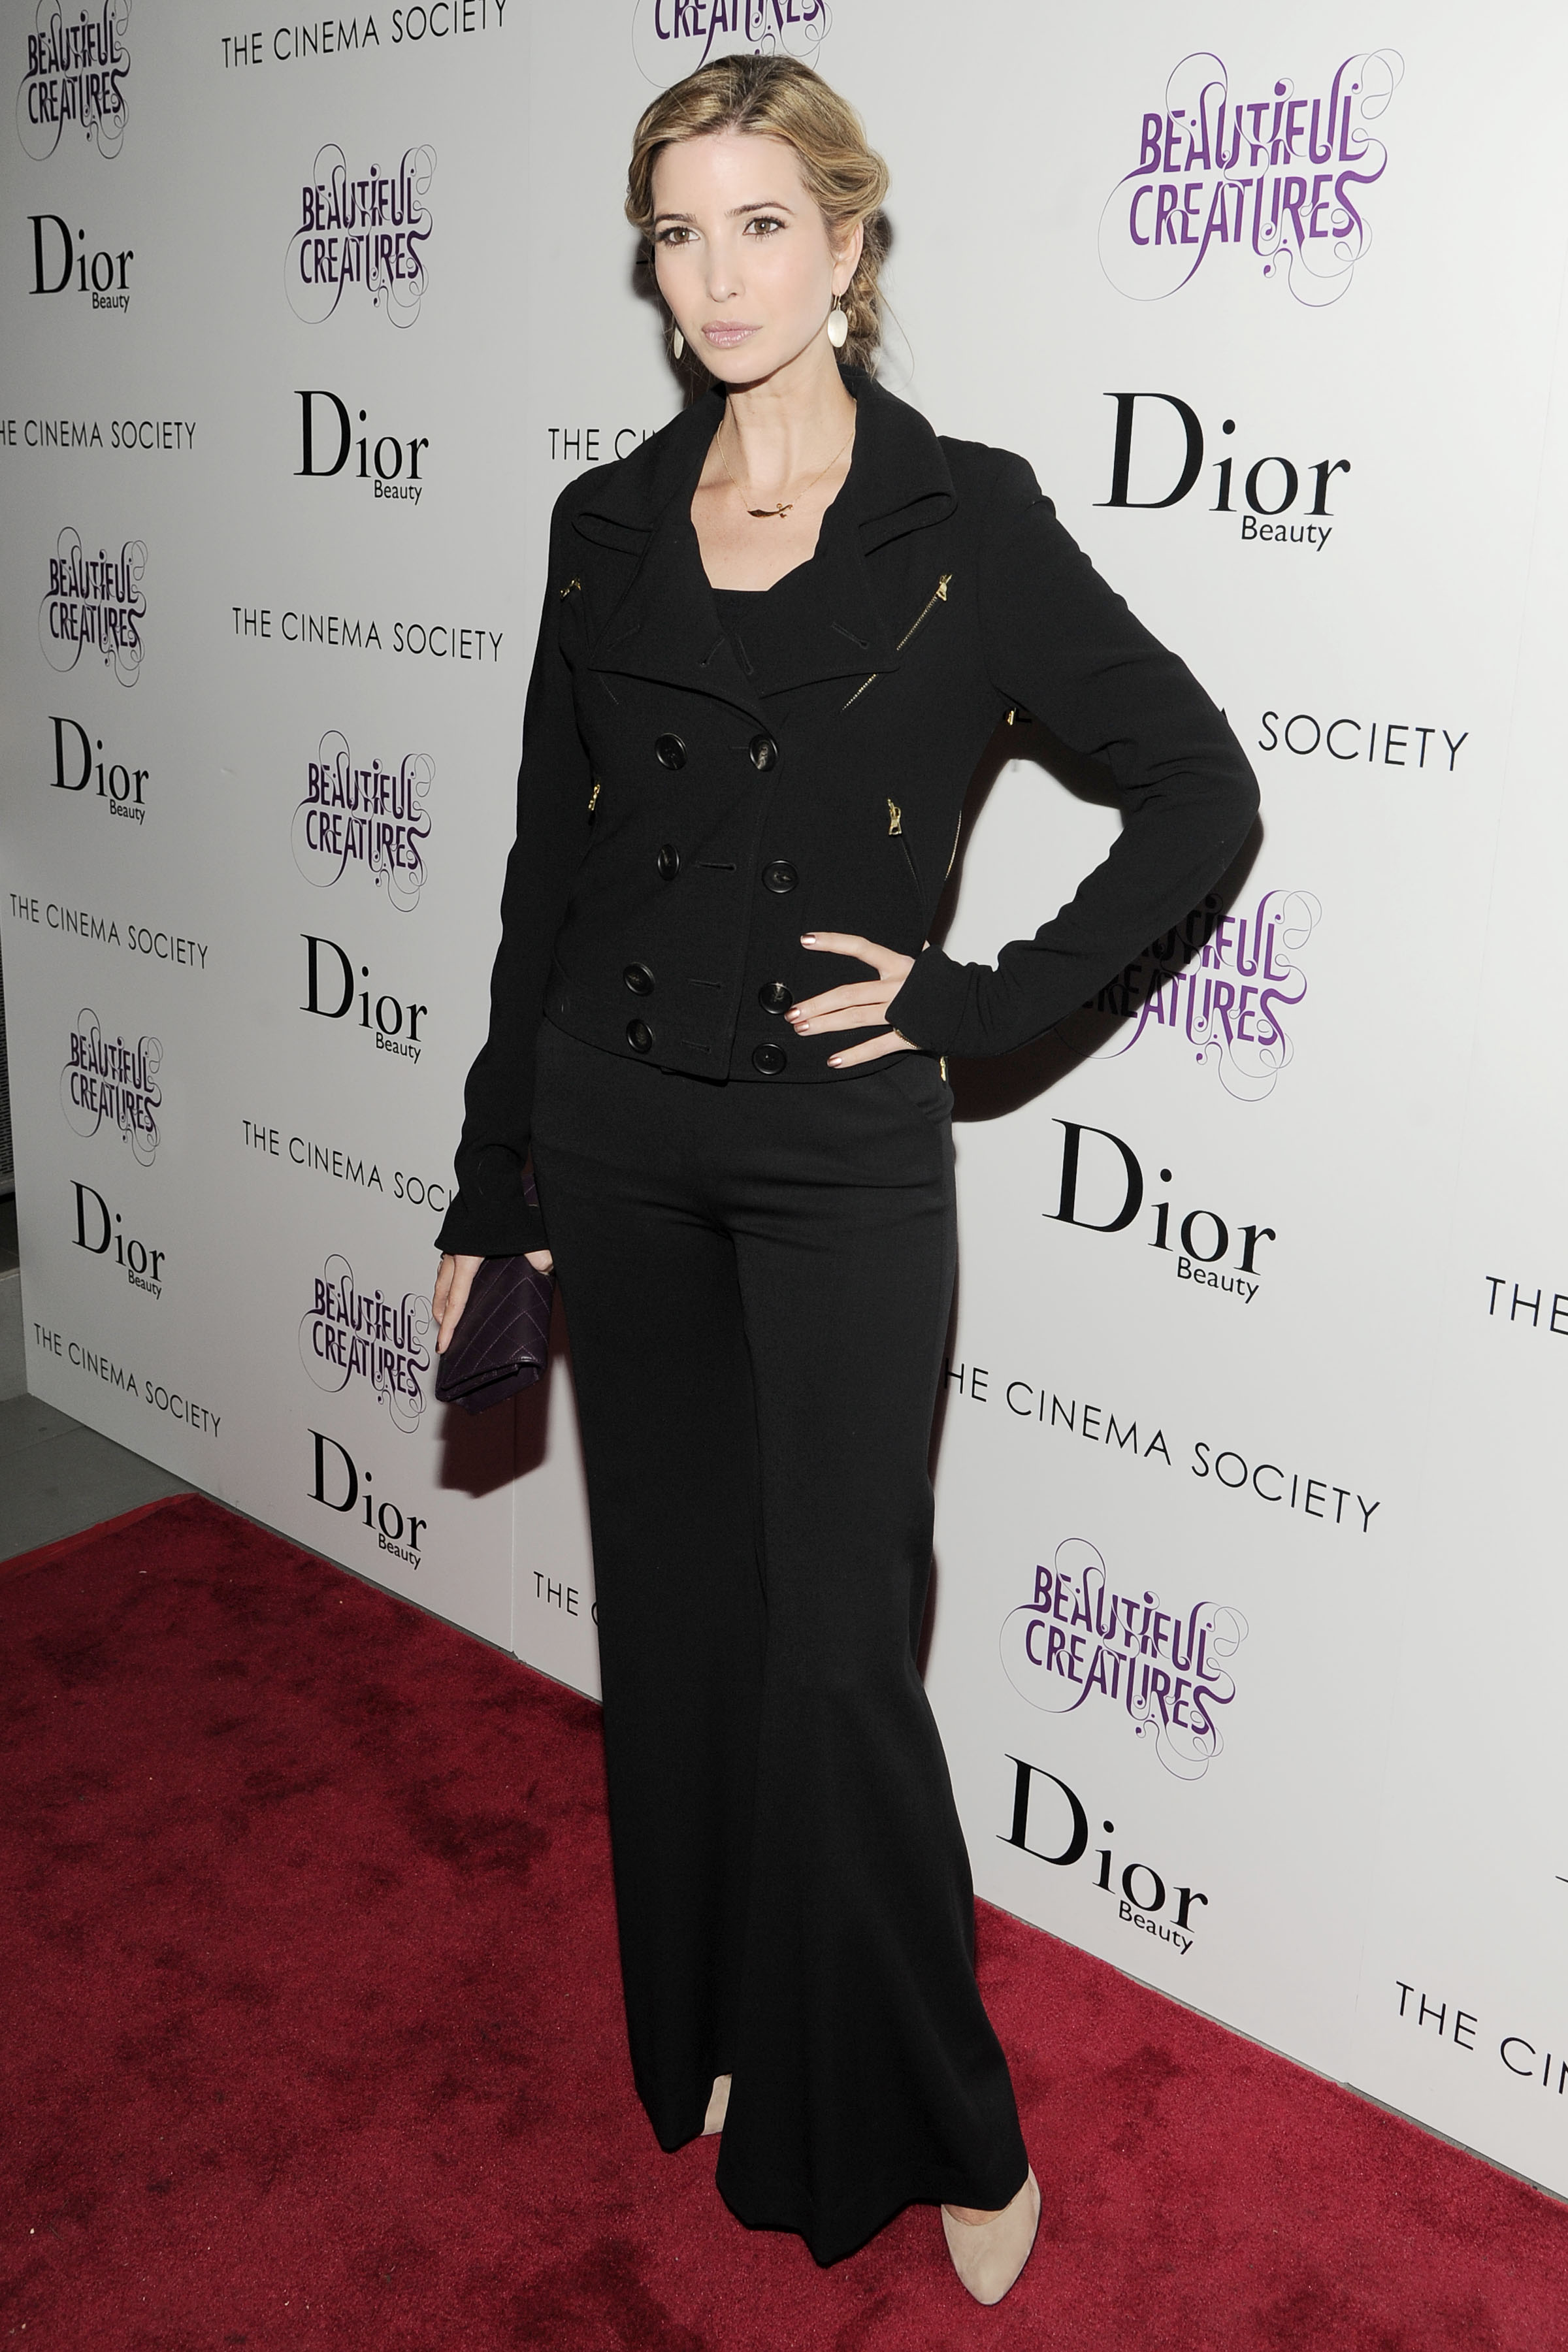 Ivanka Trump, THE CINEMA SOCIETY & DIOR BEAUTY host the after party for "BEAUTIFUL CREATURES"